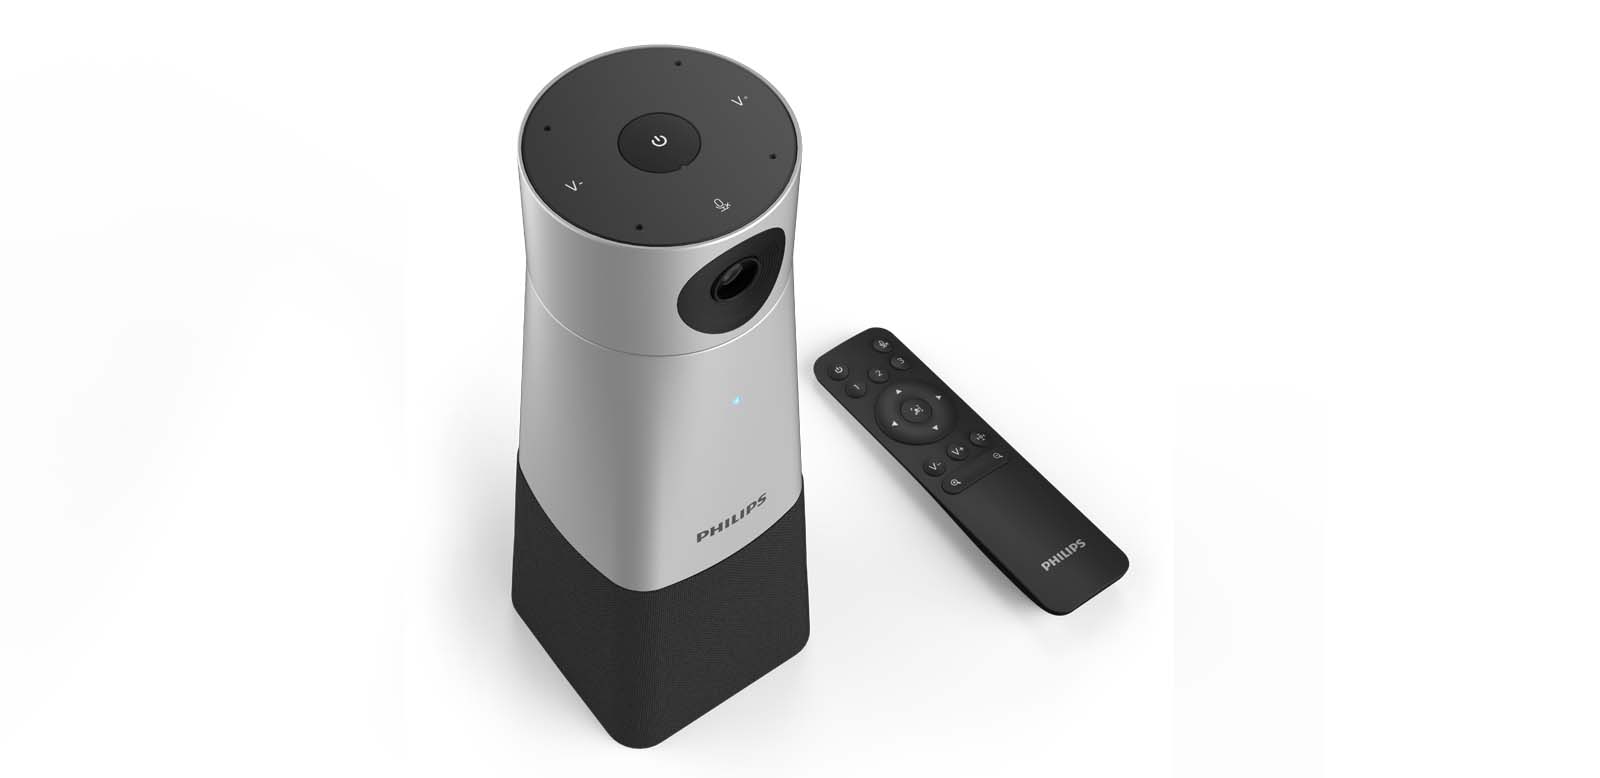 Philips SmartMeeting HD Audio and Video Conferencing Solution with Sembly Meeting Assistant